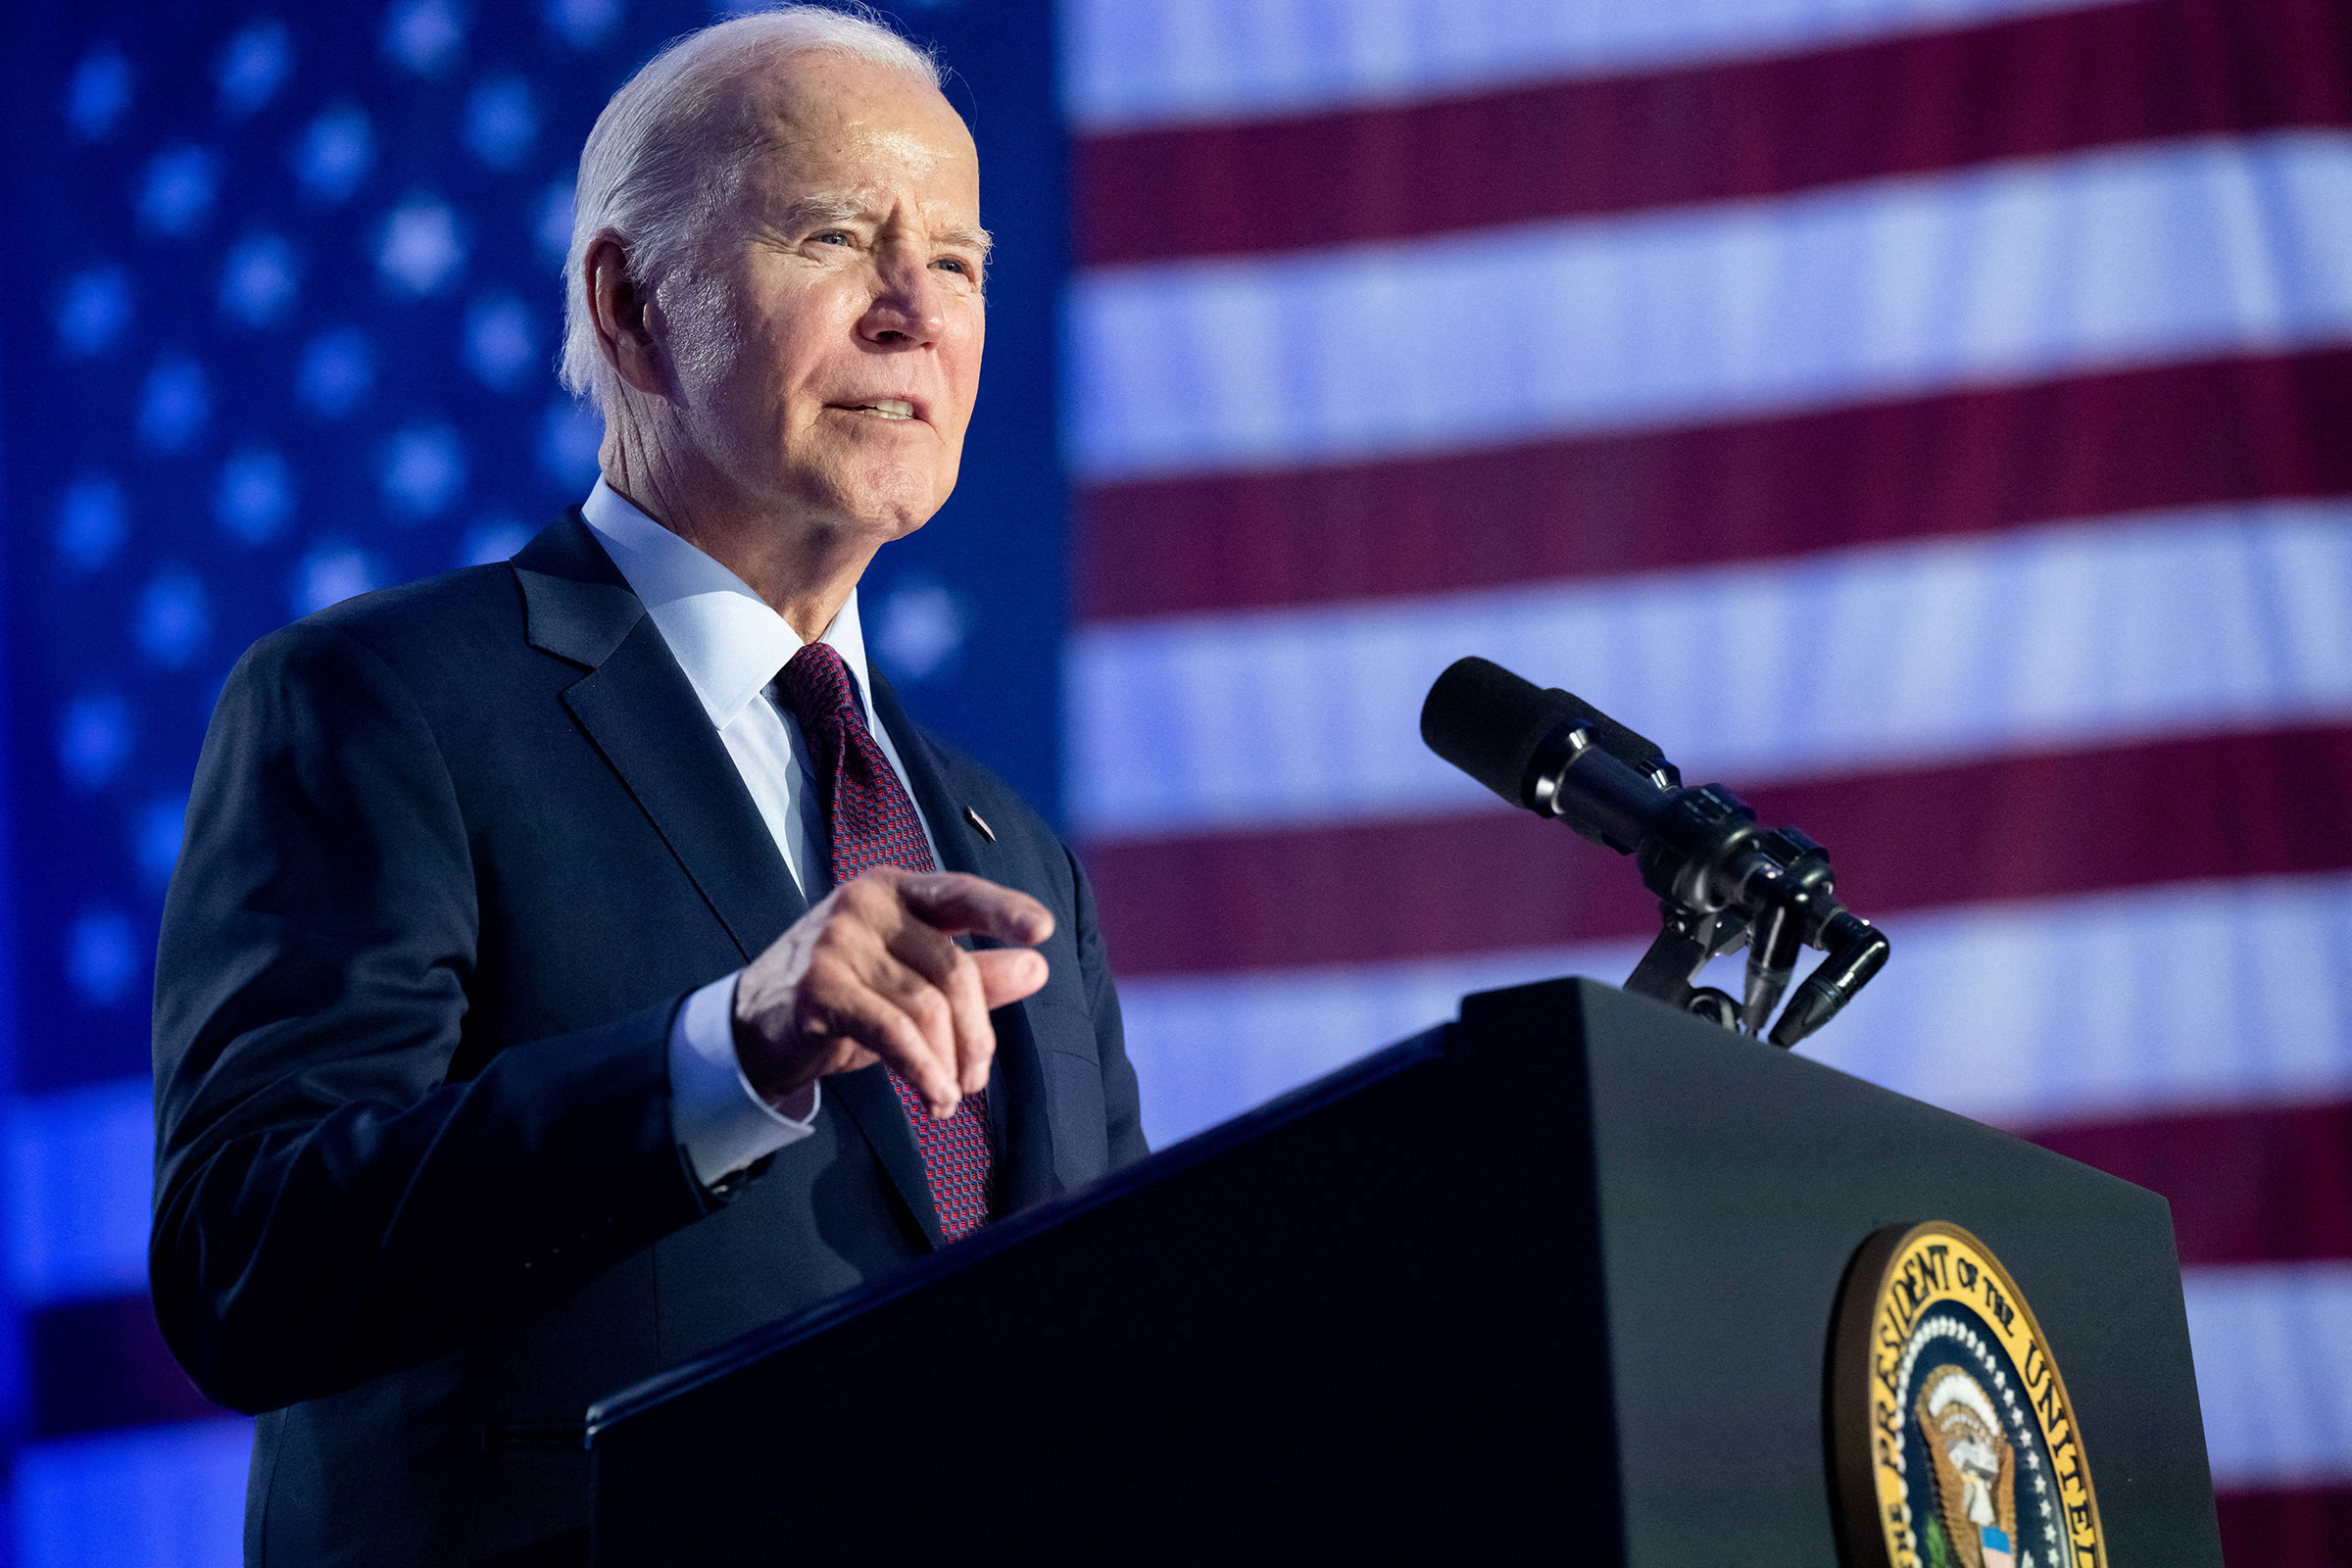 President Joe Biden speaks during a campaign rally at Pearson Community Center in Las Vegas, Nevada, on February 4.